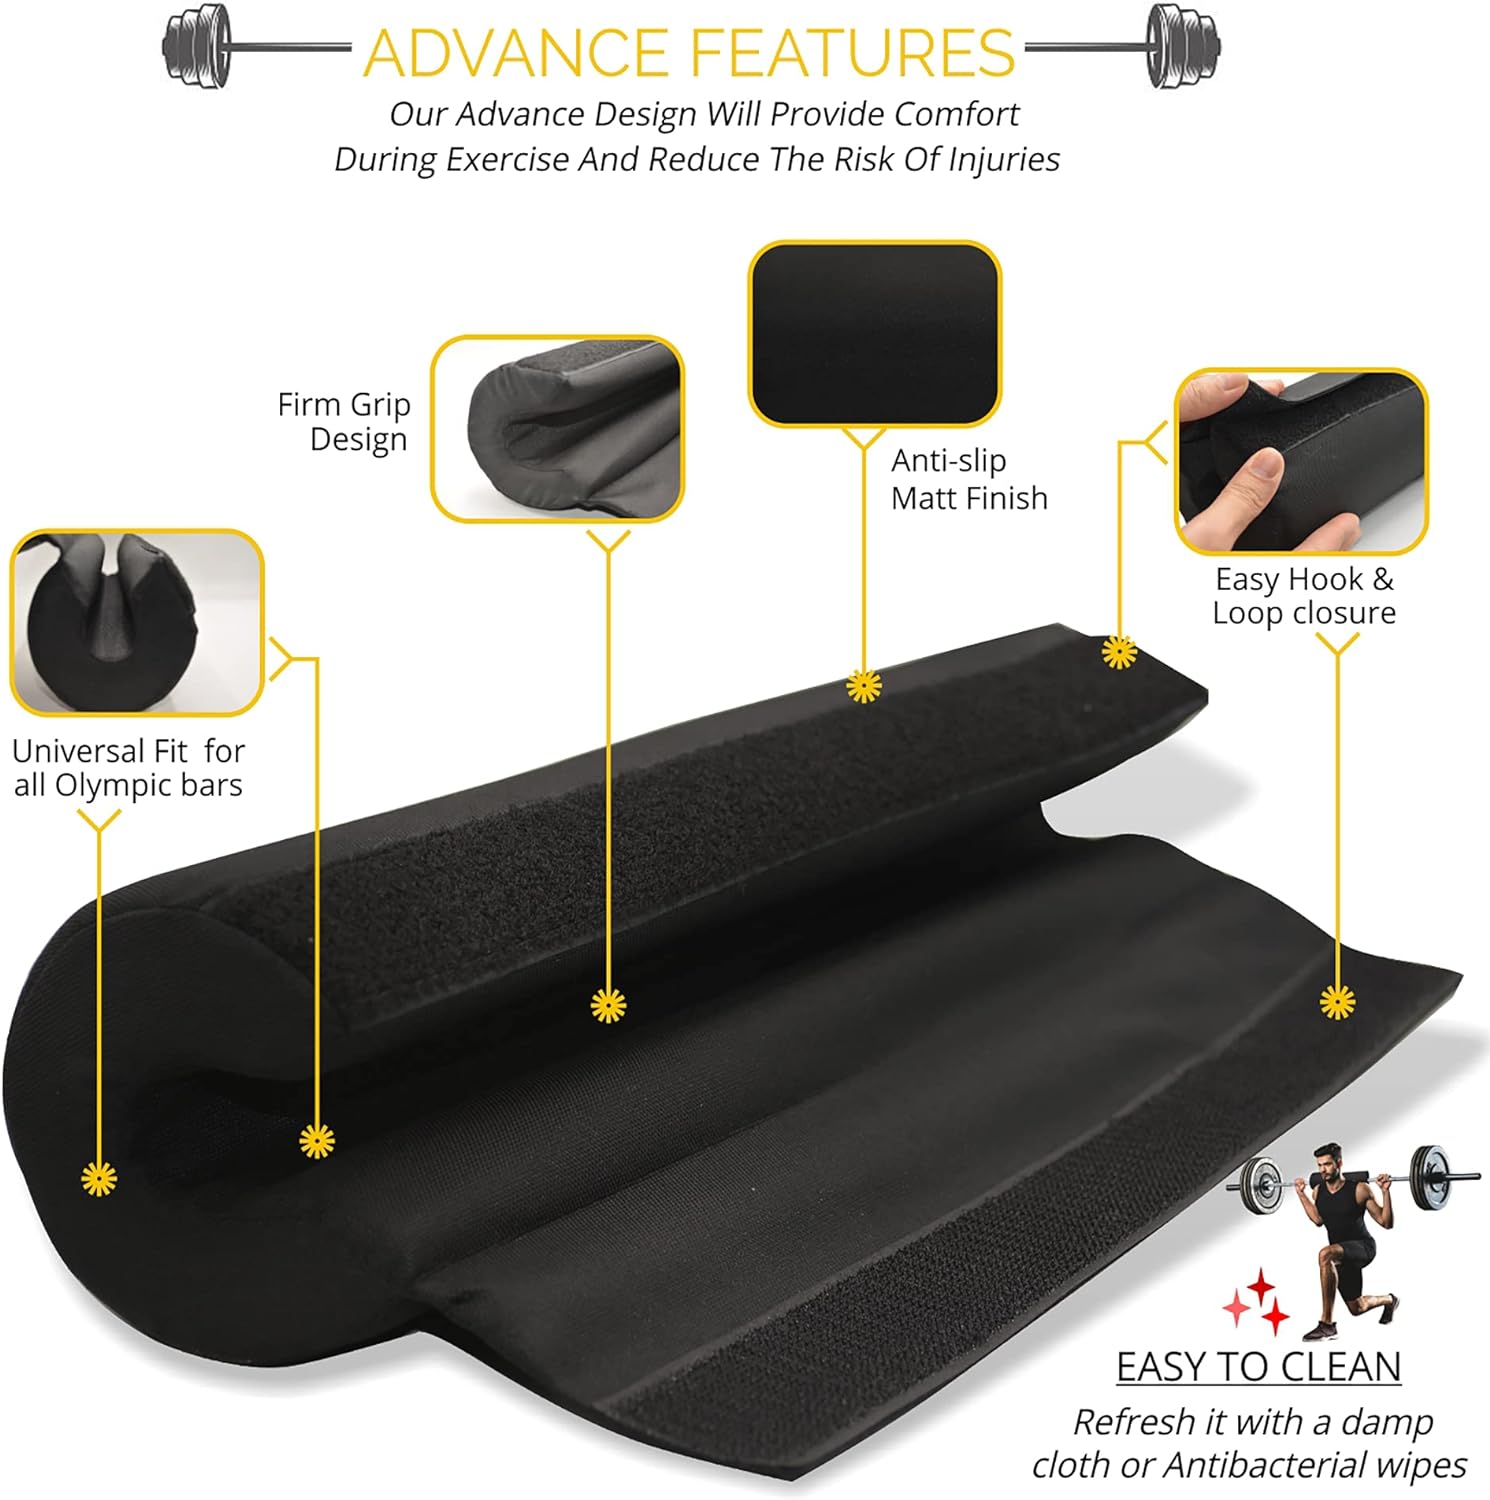 R2F Barbell Pad heavy duty cushioned foam for Weighted Olympic or Standard bar anti slip shoulder & neck support protection. Our weight lifting high-density hip thrust pad helps distribute weight evenly across the body to protect neck, back and hips during squats, lunges, and more. 